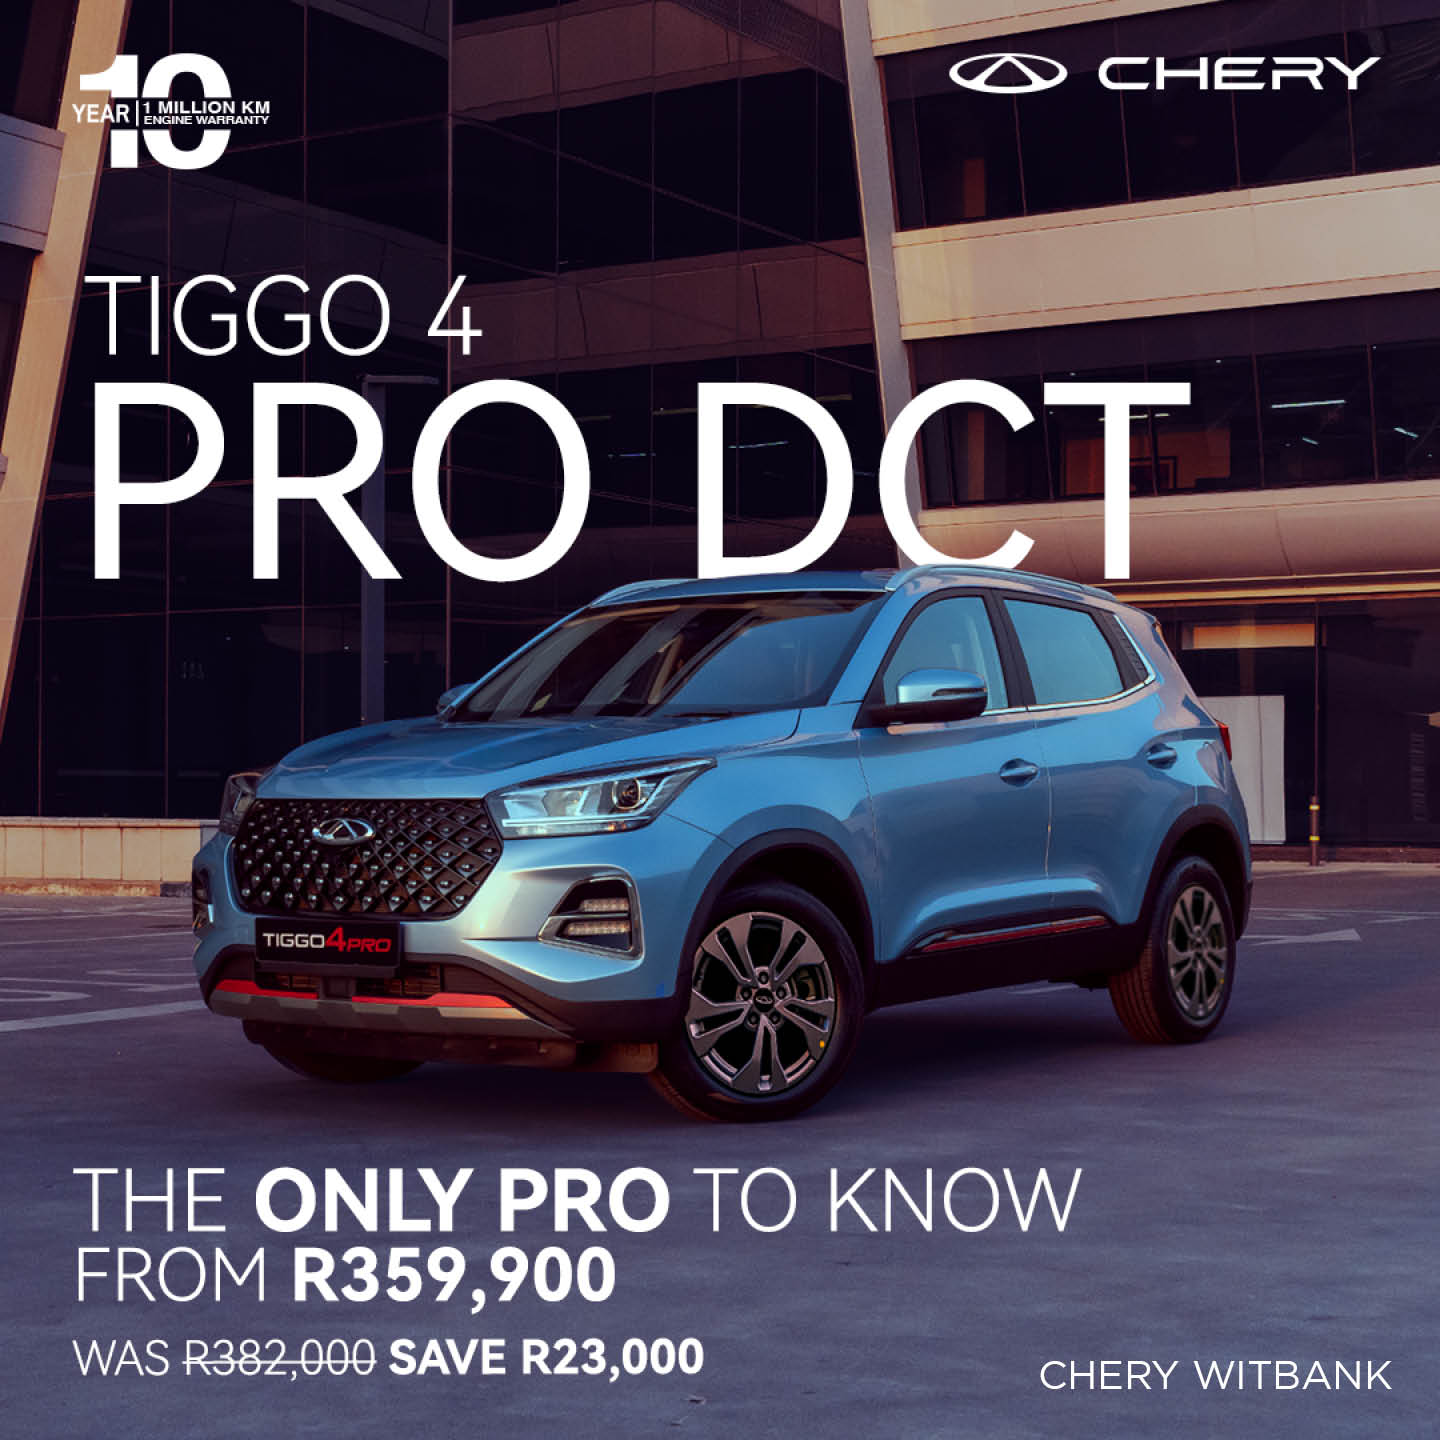 The ONLY PRO you know! TIGGO 4 PRO DCT image from 